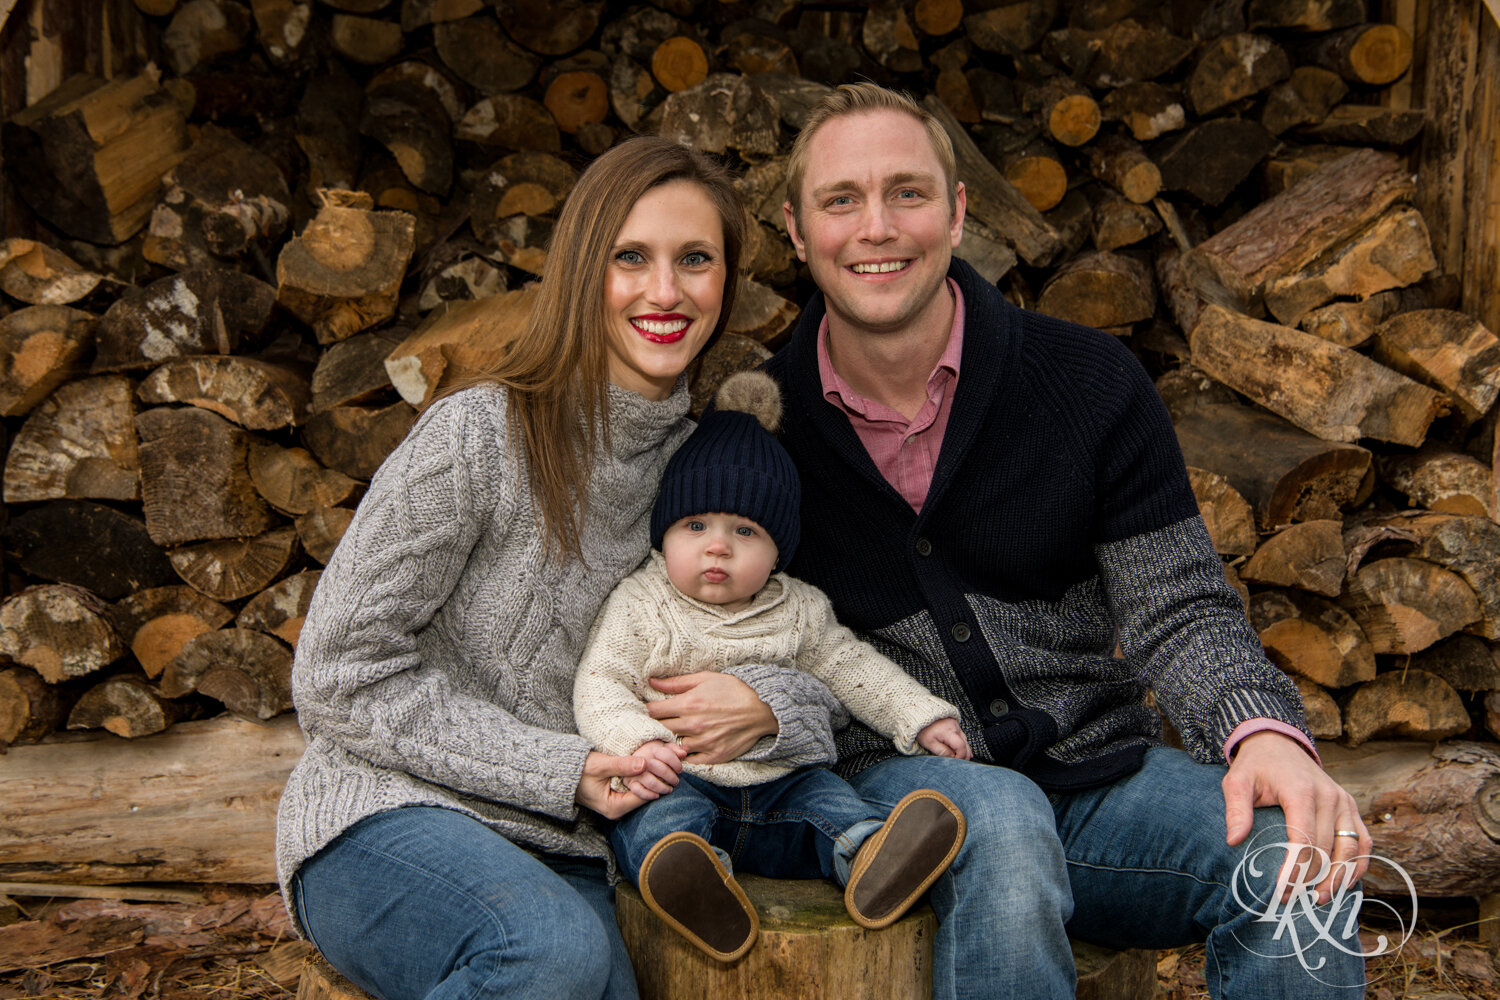 Man and woman hold baby and smile in front of woodpile at Hansen Tree Farm in Anoka, Minnesota.